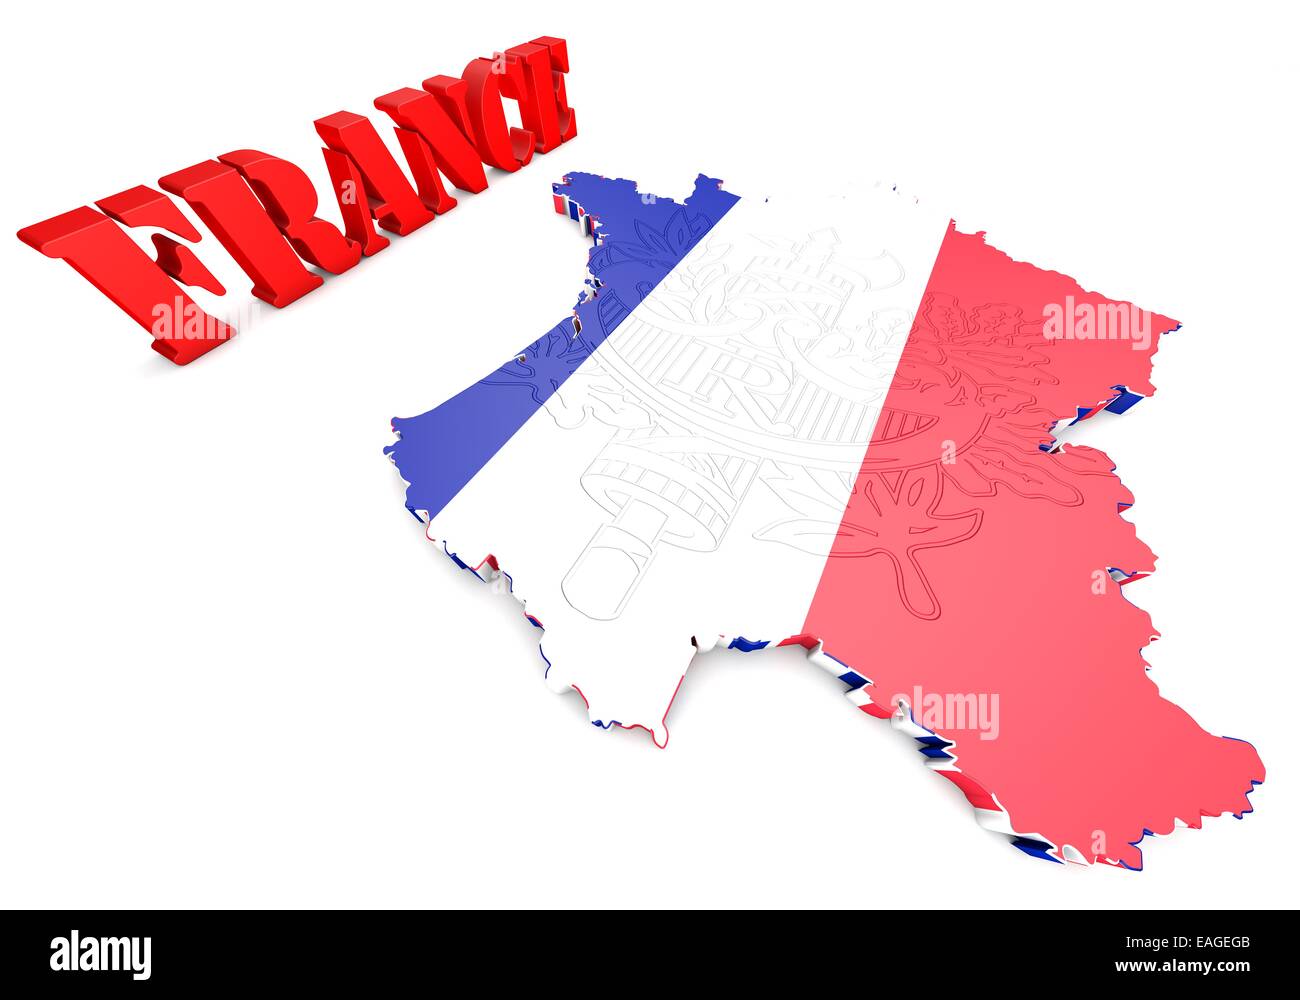 Map of France with flag colors. 3d render illustration. Stock Photo